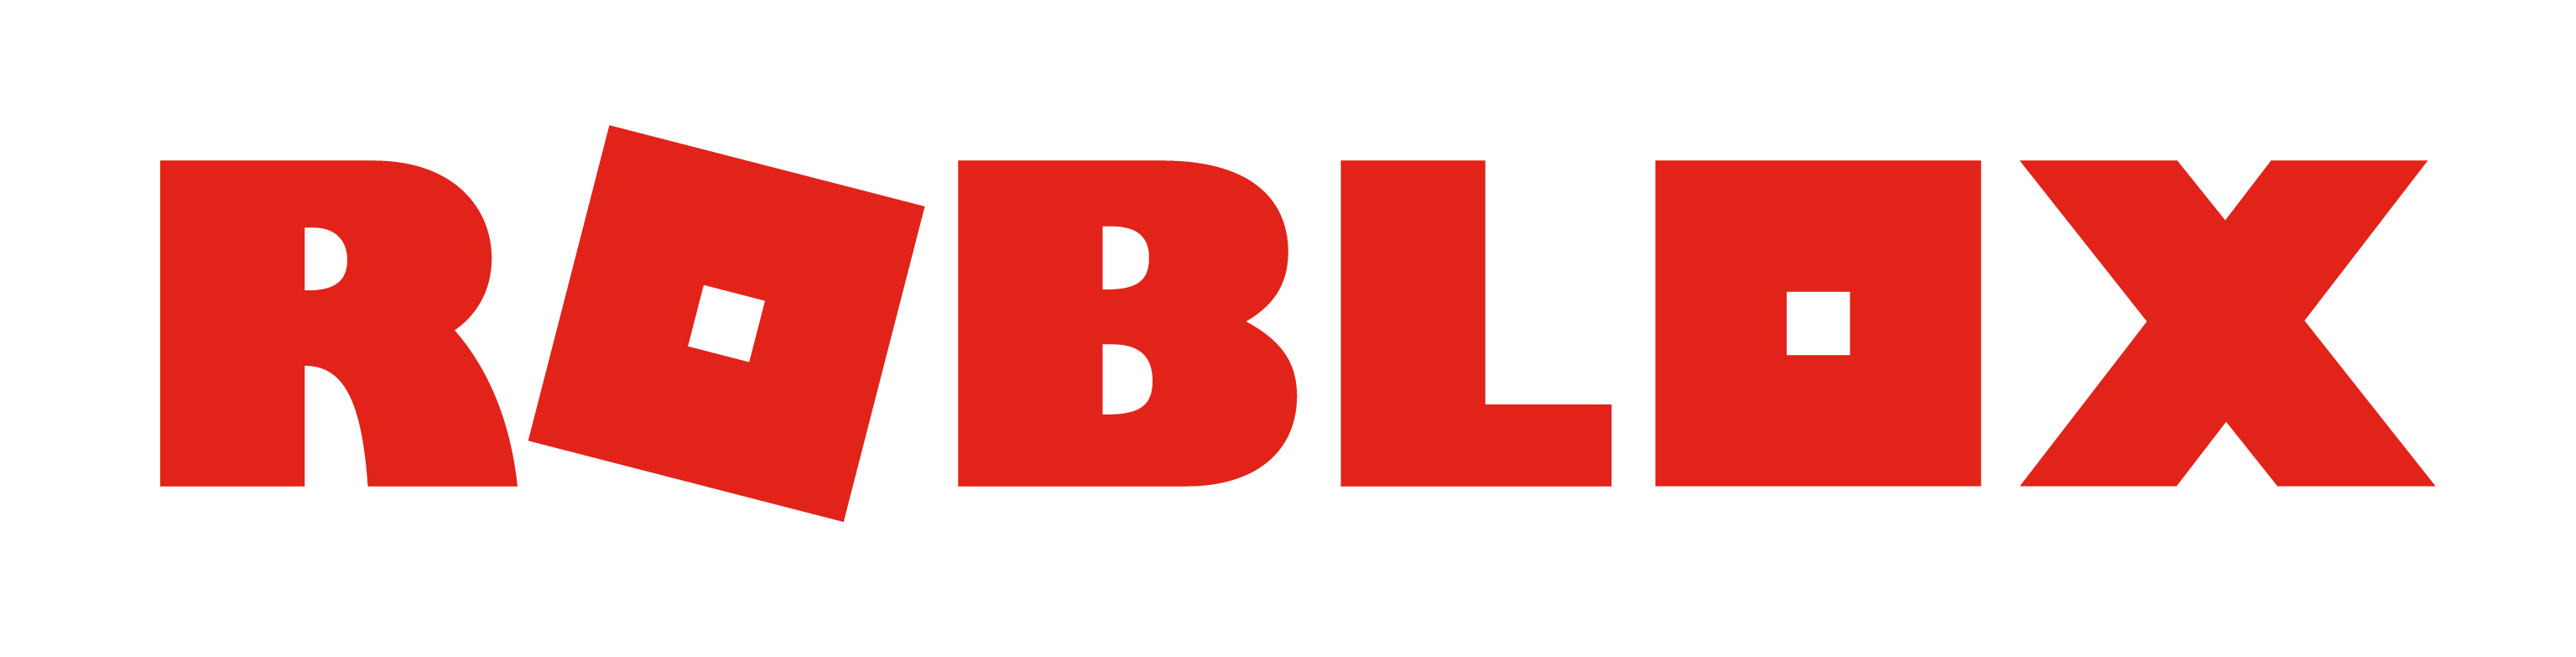 Download Roblox Corporation Game Red Text Free Hd Image Hq Png Image Freepngimg - what is roblox's in game resolution